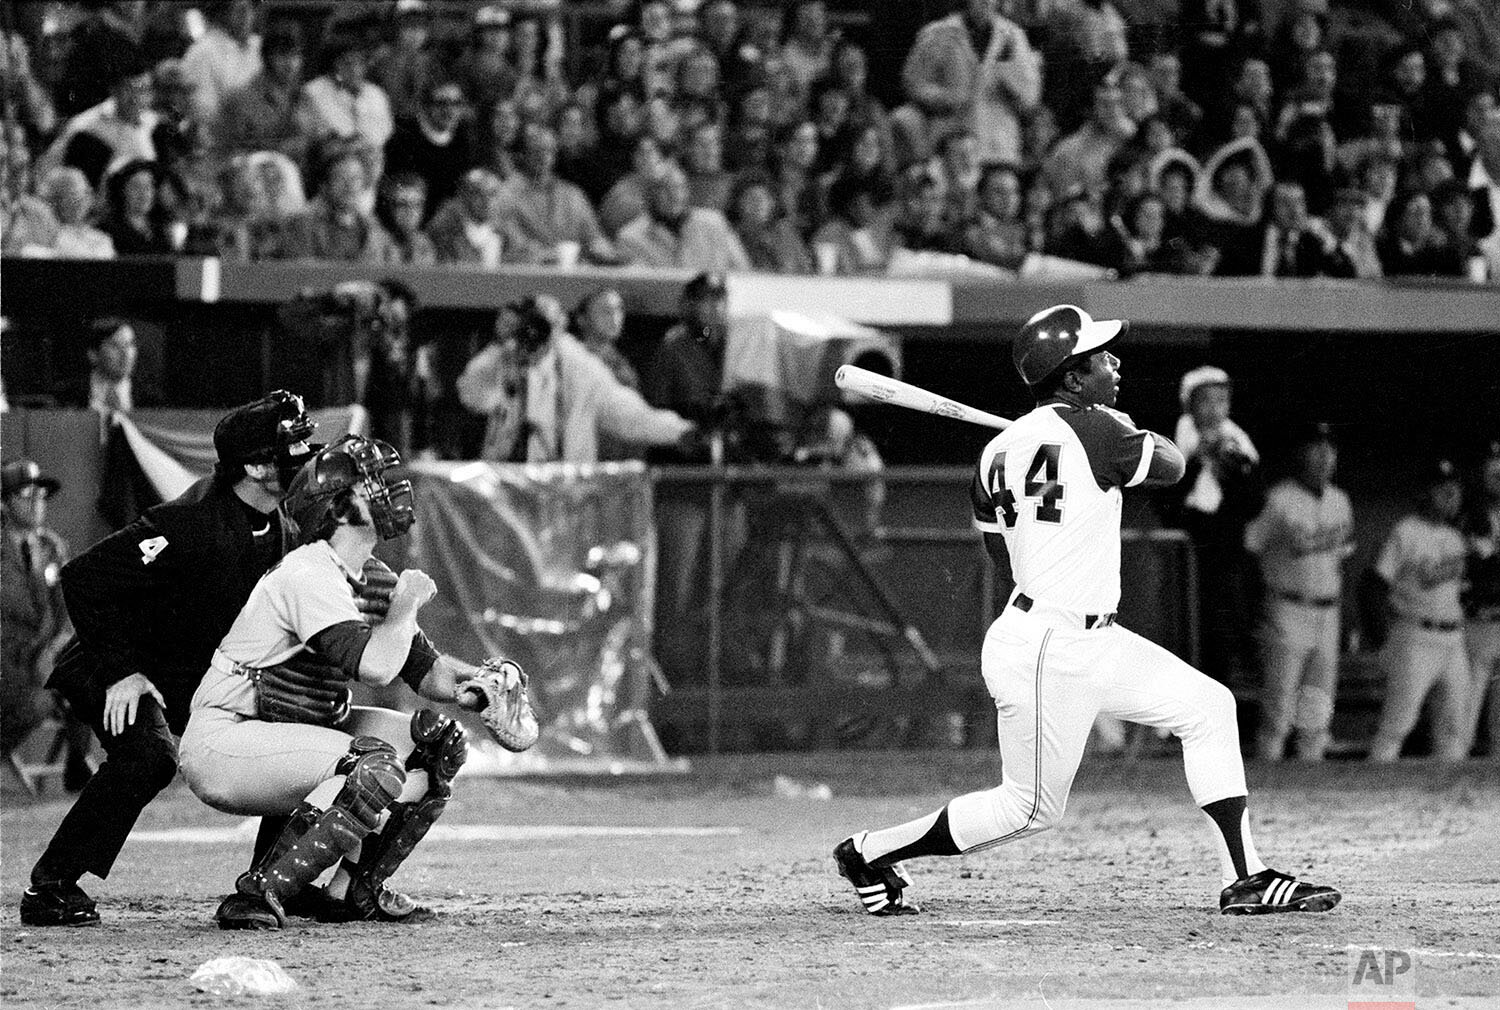  Atlanta Braves' Hank Aaron (44) breaks Babe Ruth's record for career home runs as he hits his 715th off Los Angeles Dodgers pitcher Al Downing in the fourth inning of the game opener at Atlanta-Fulton County Stadium, Ga., Monday night, April 8, 1974